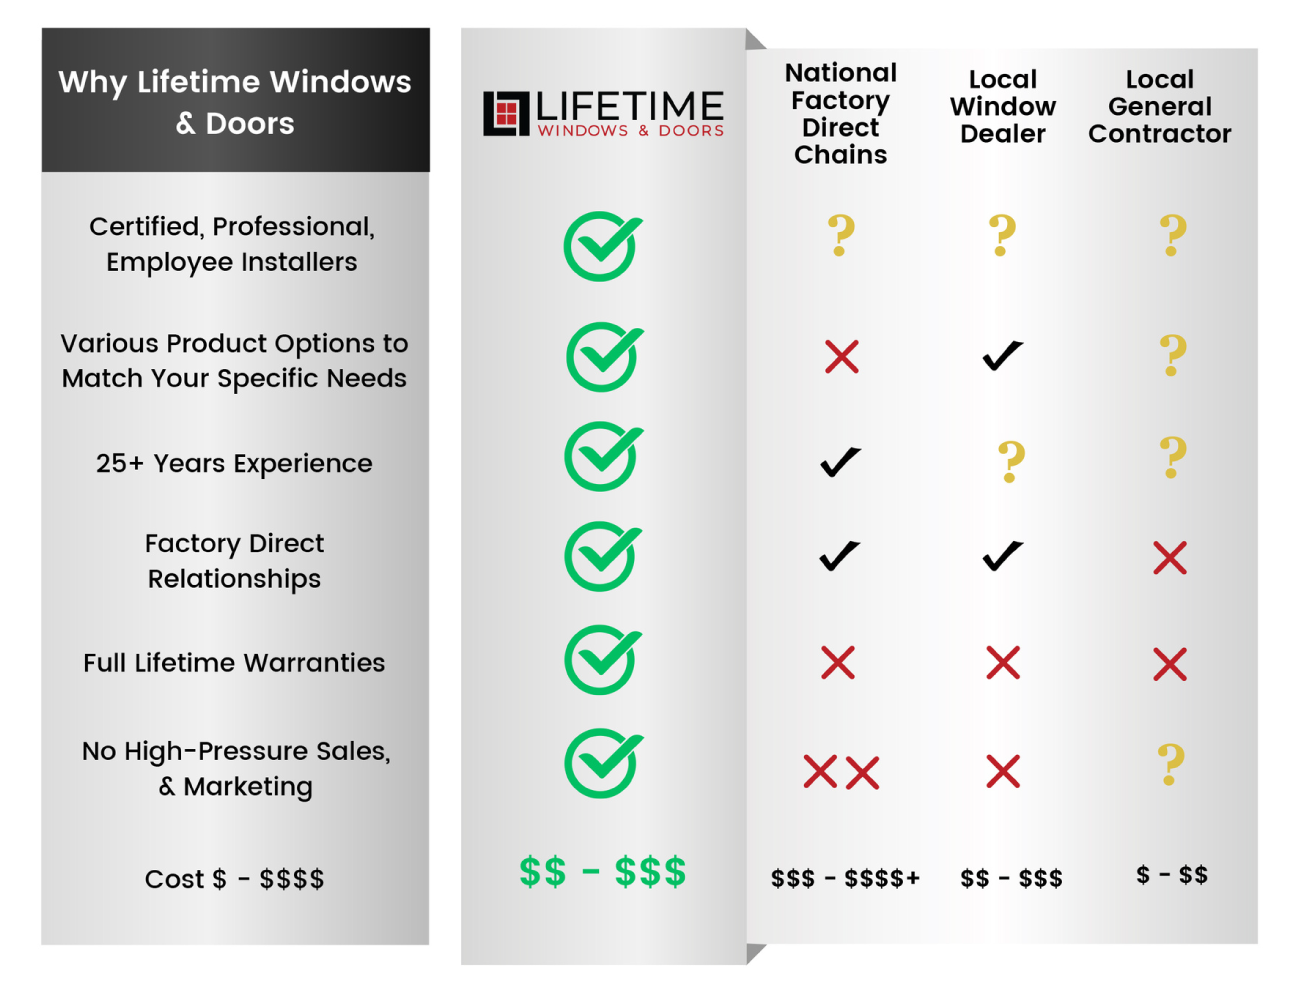 Why Lifetime Windows & Doors - Certified Installers, 25+ Years Experience, Factory Direct Relationships, Full Lifetime Warranties